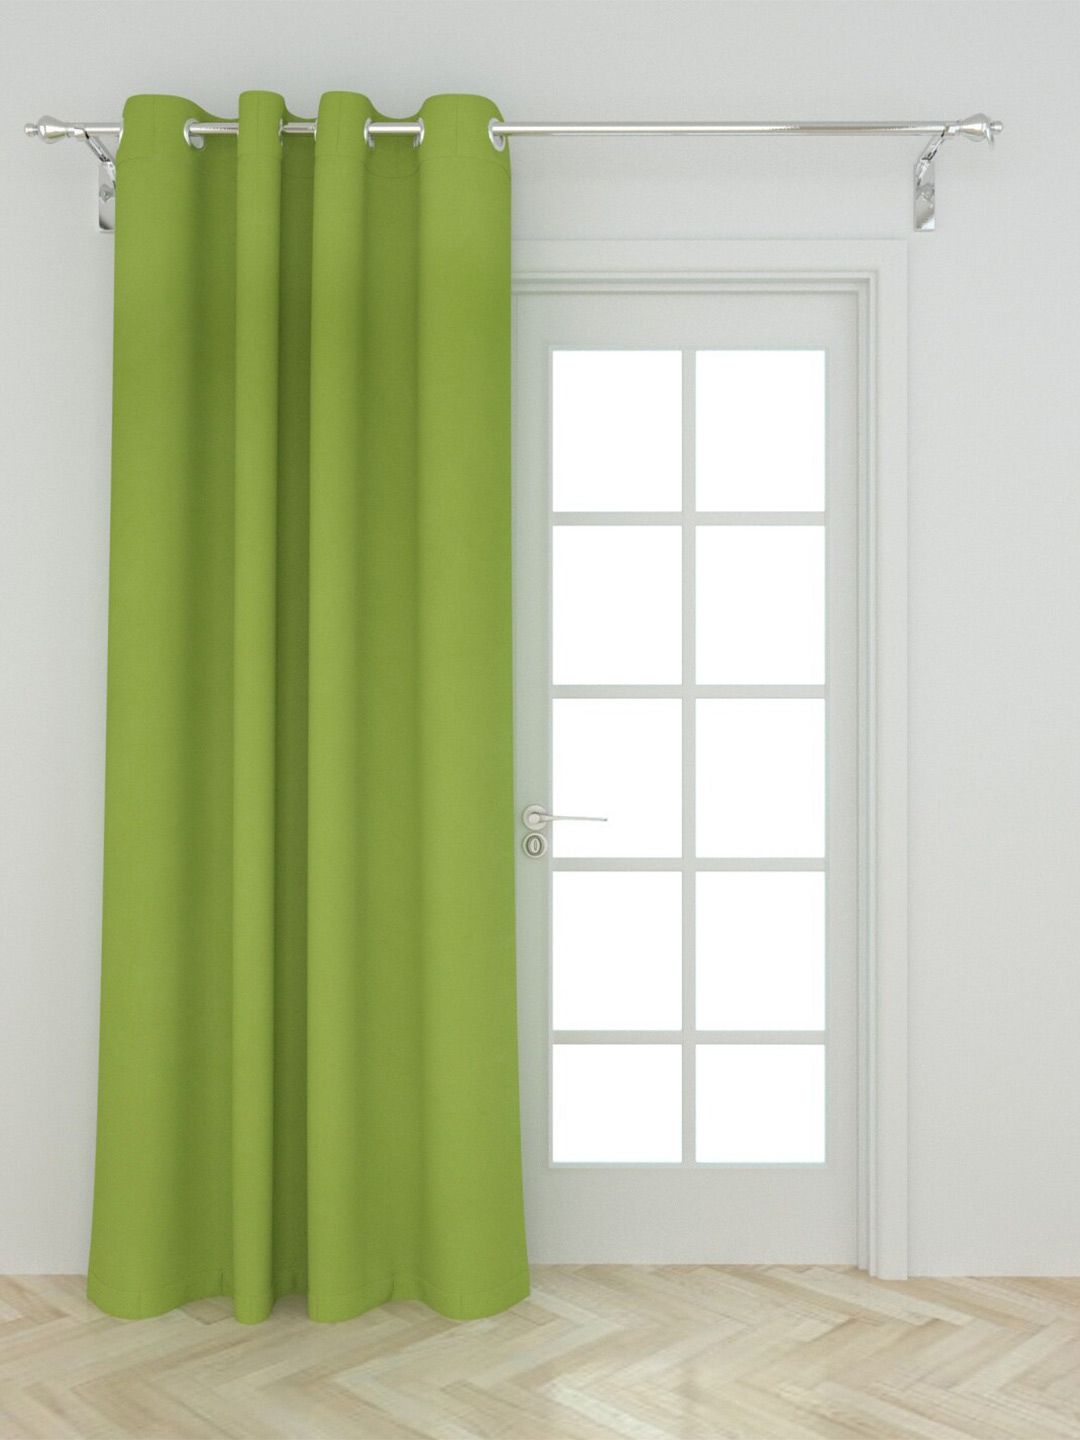 Home Centre Green Door Curtain Price in India